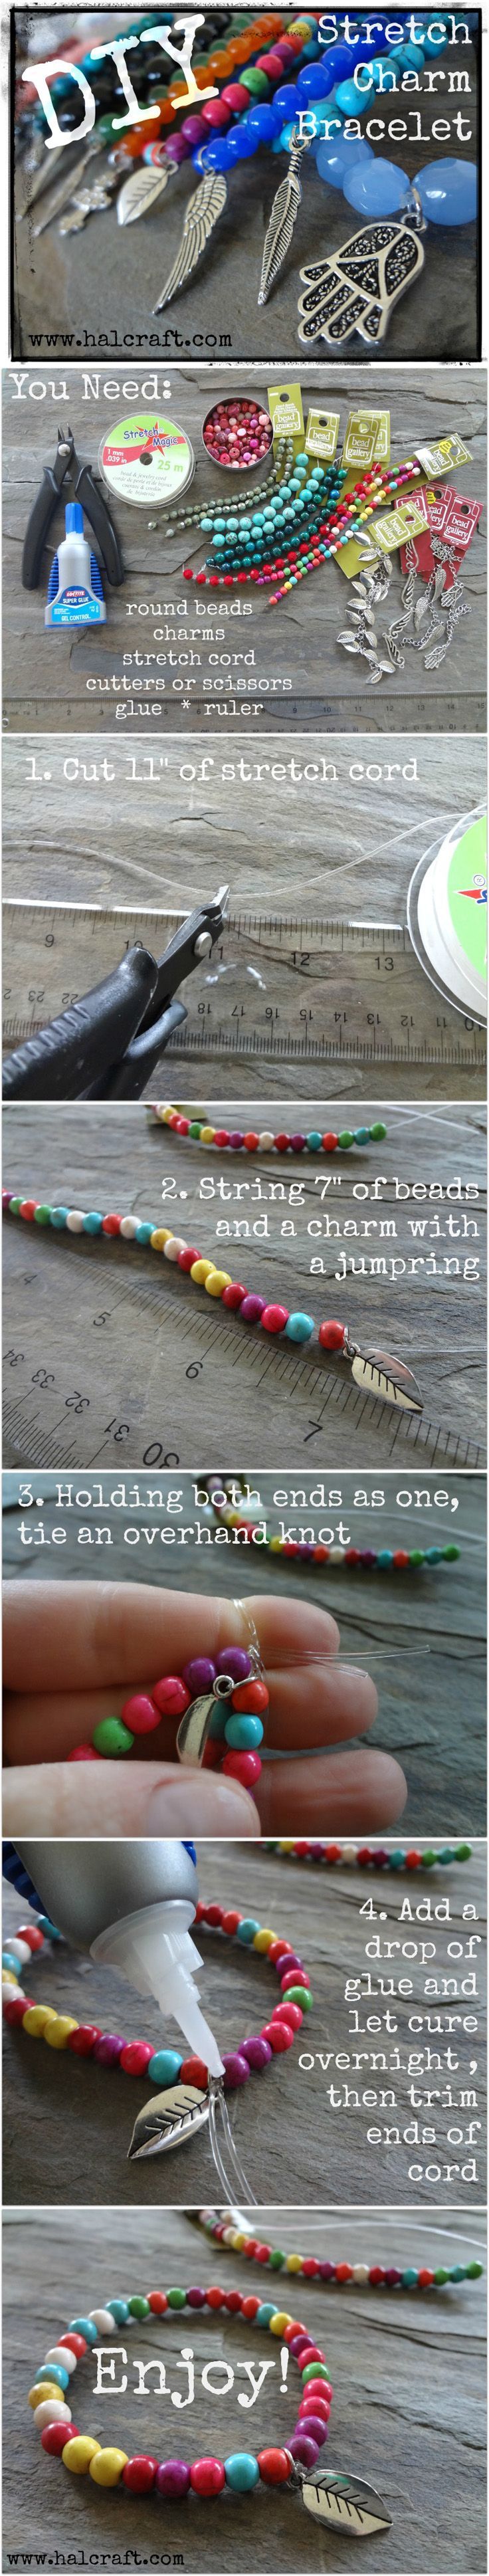 Learn how to make stretch charm bracelets and tie a knot that holds with this photo tutorial! Visit